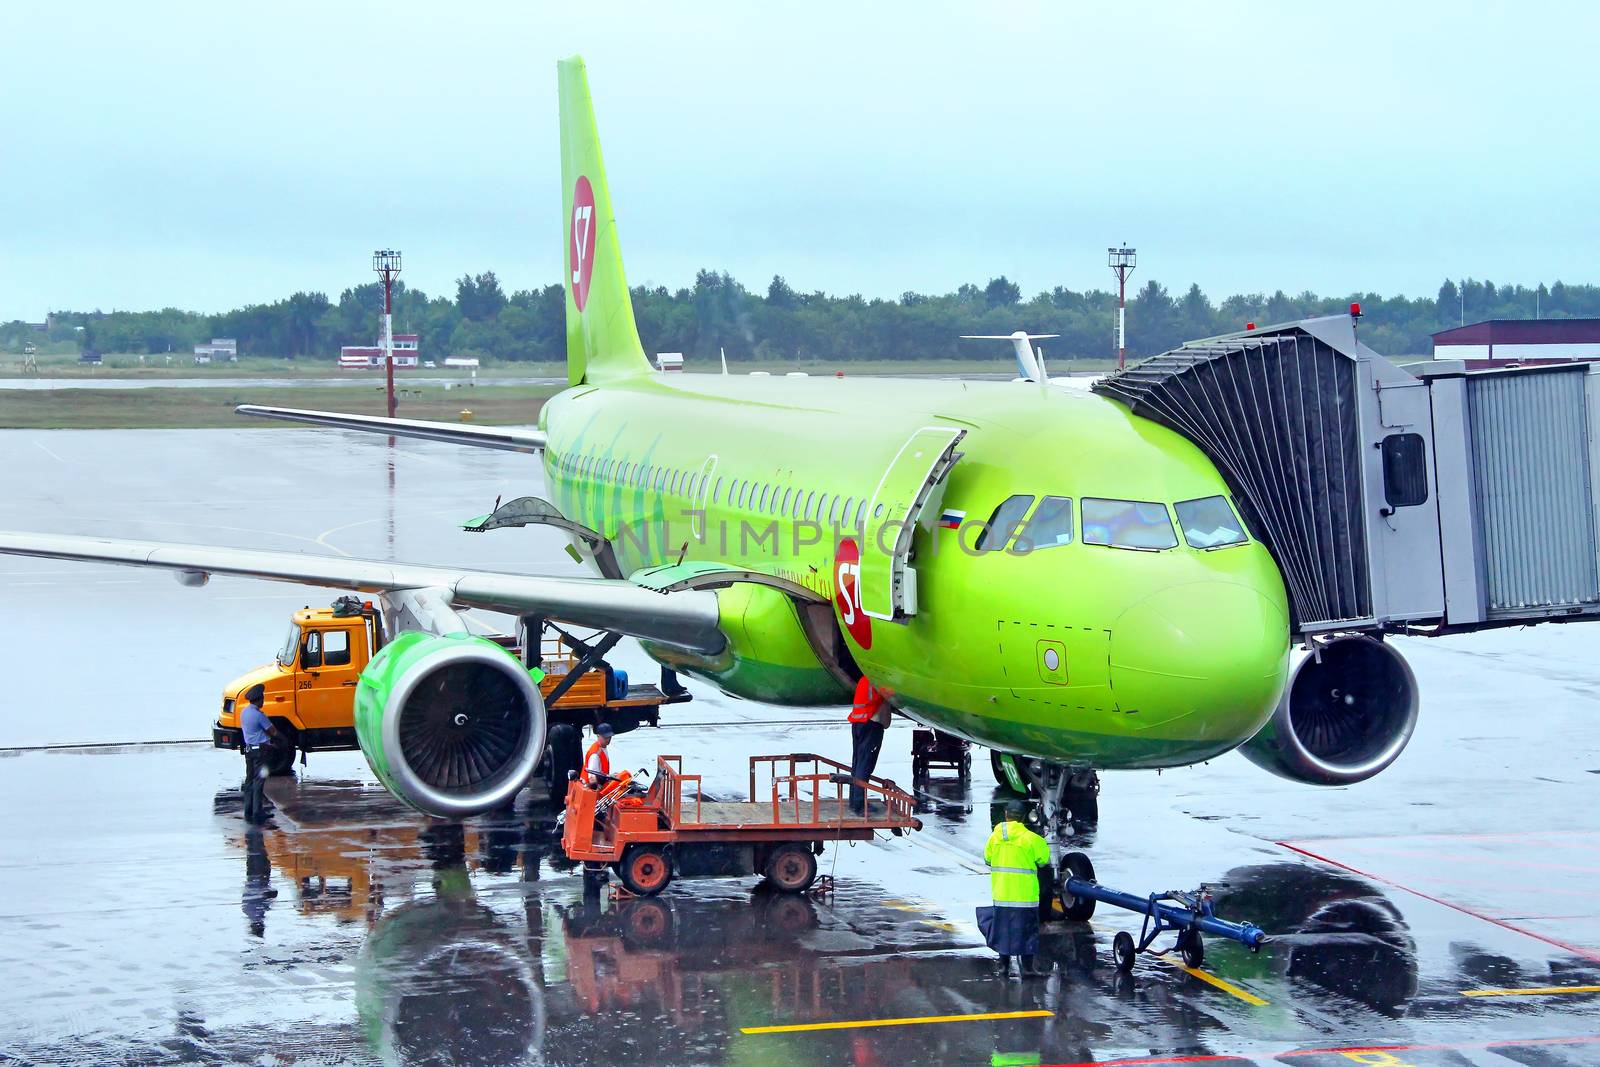 S7 Airlines Airbus A319 by Artzzz